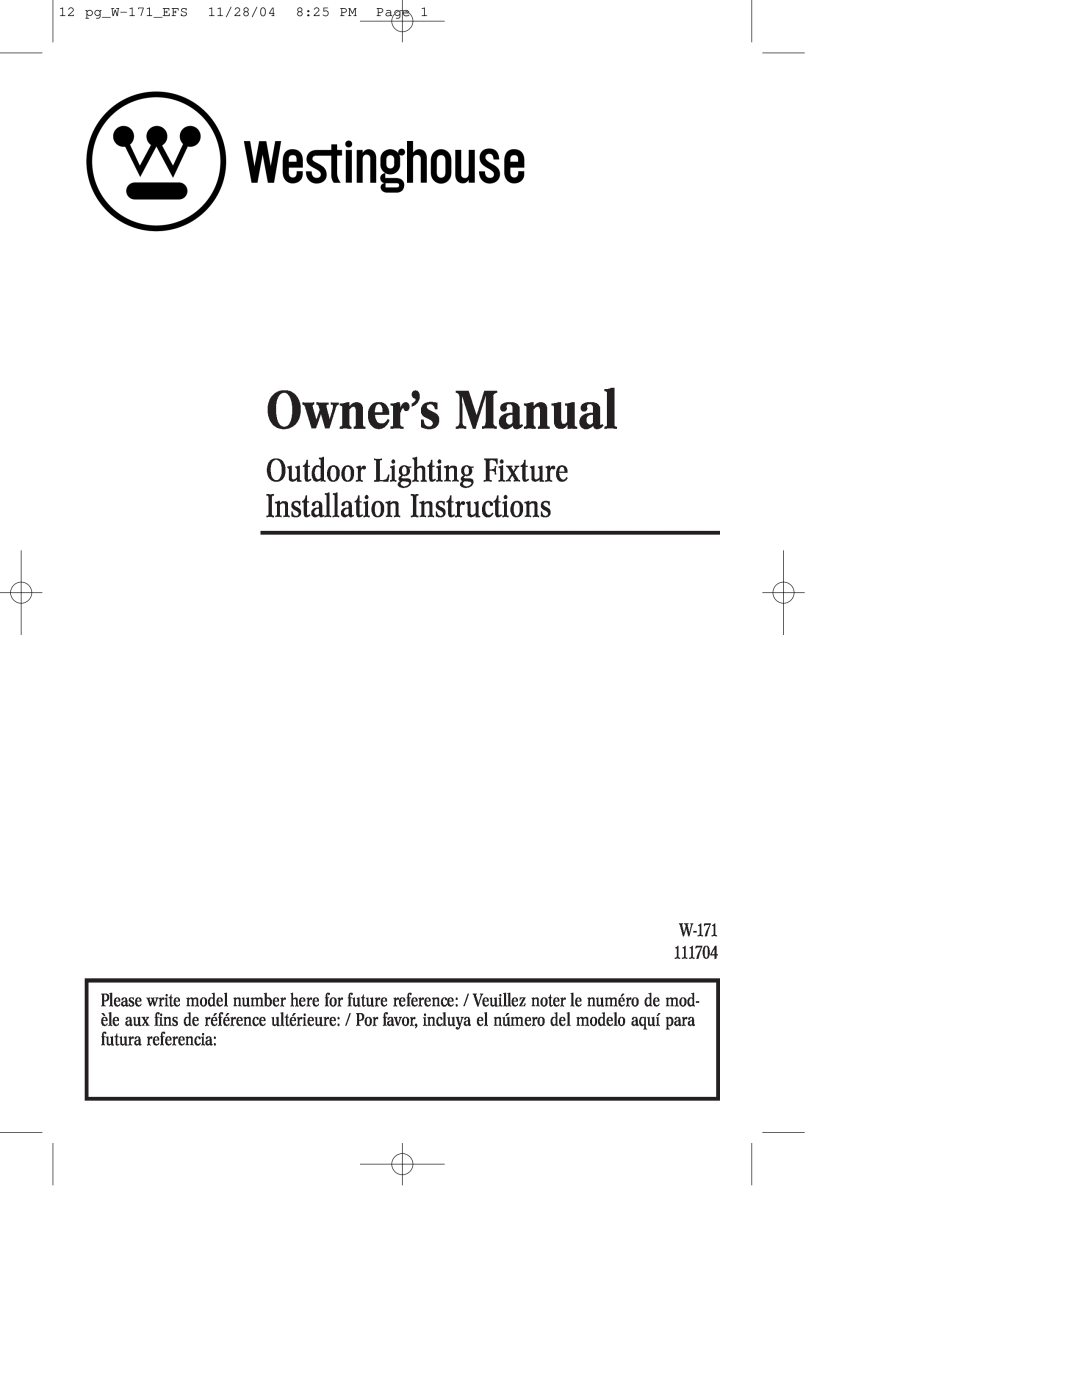 Westinghouse owner manual Outdoor Lighting Fixture Installation Instructions 